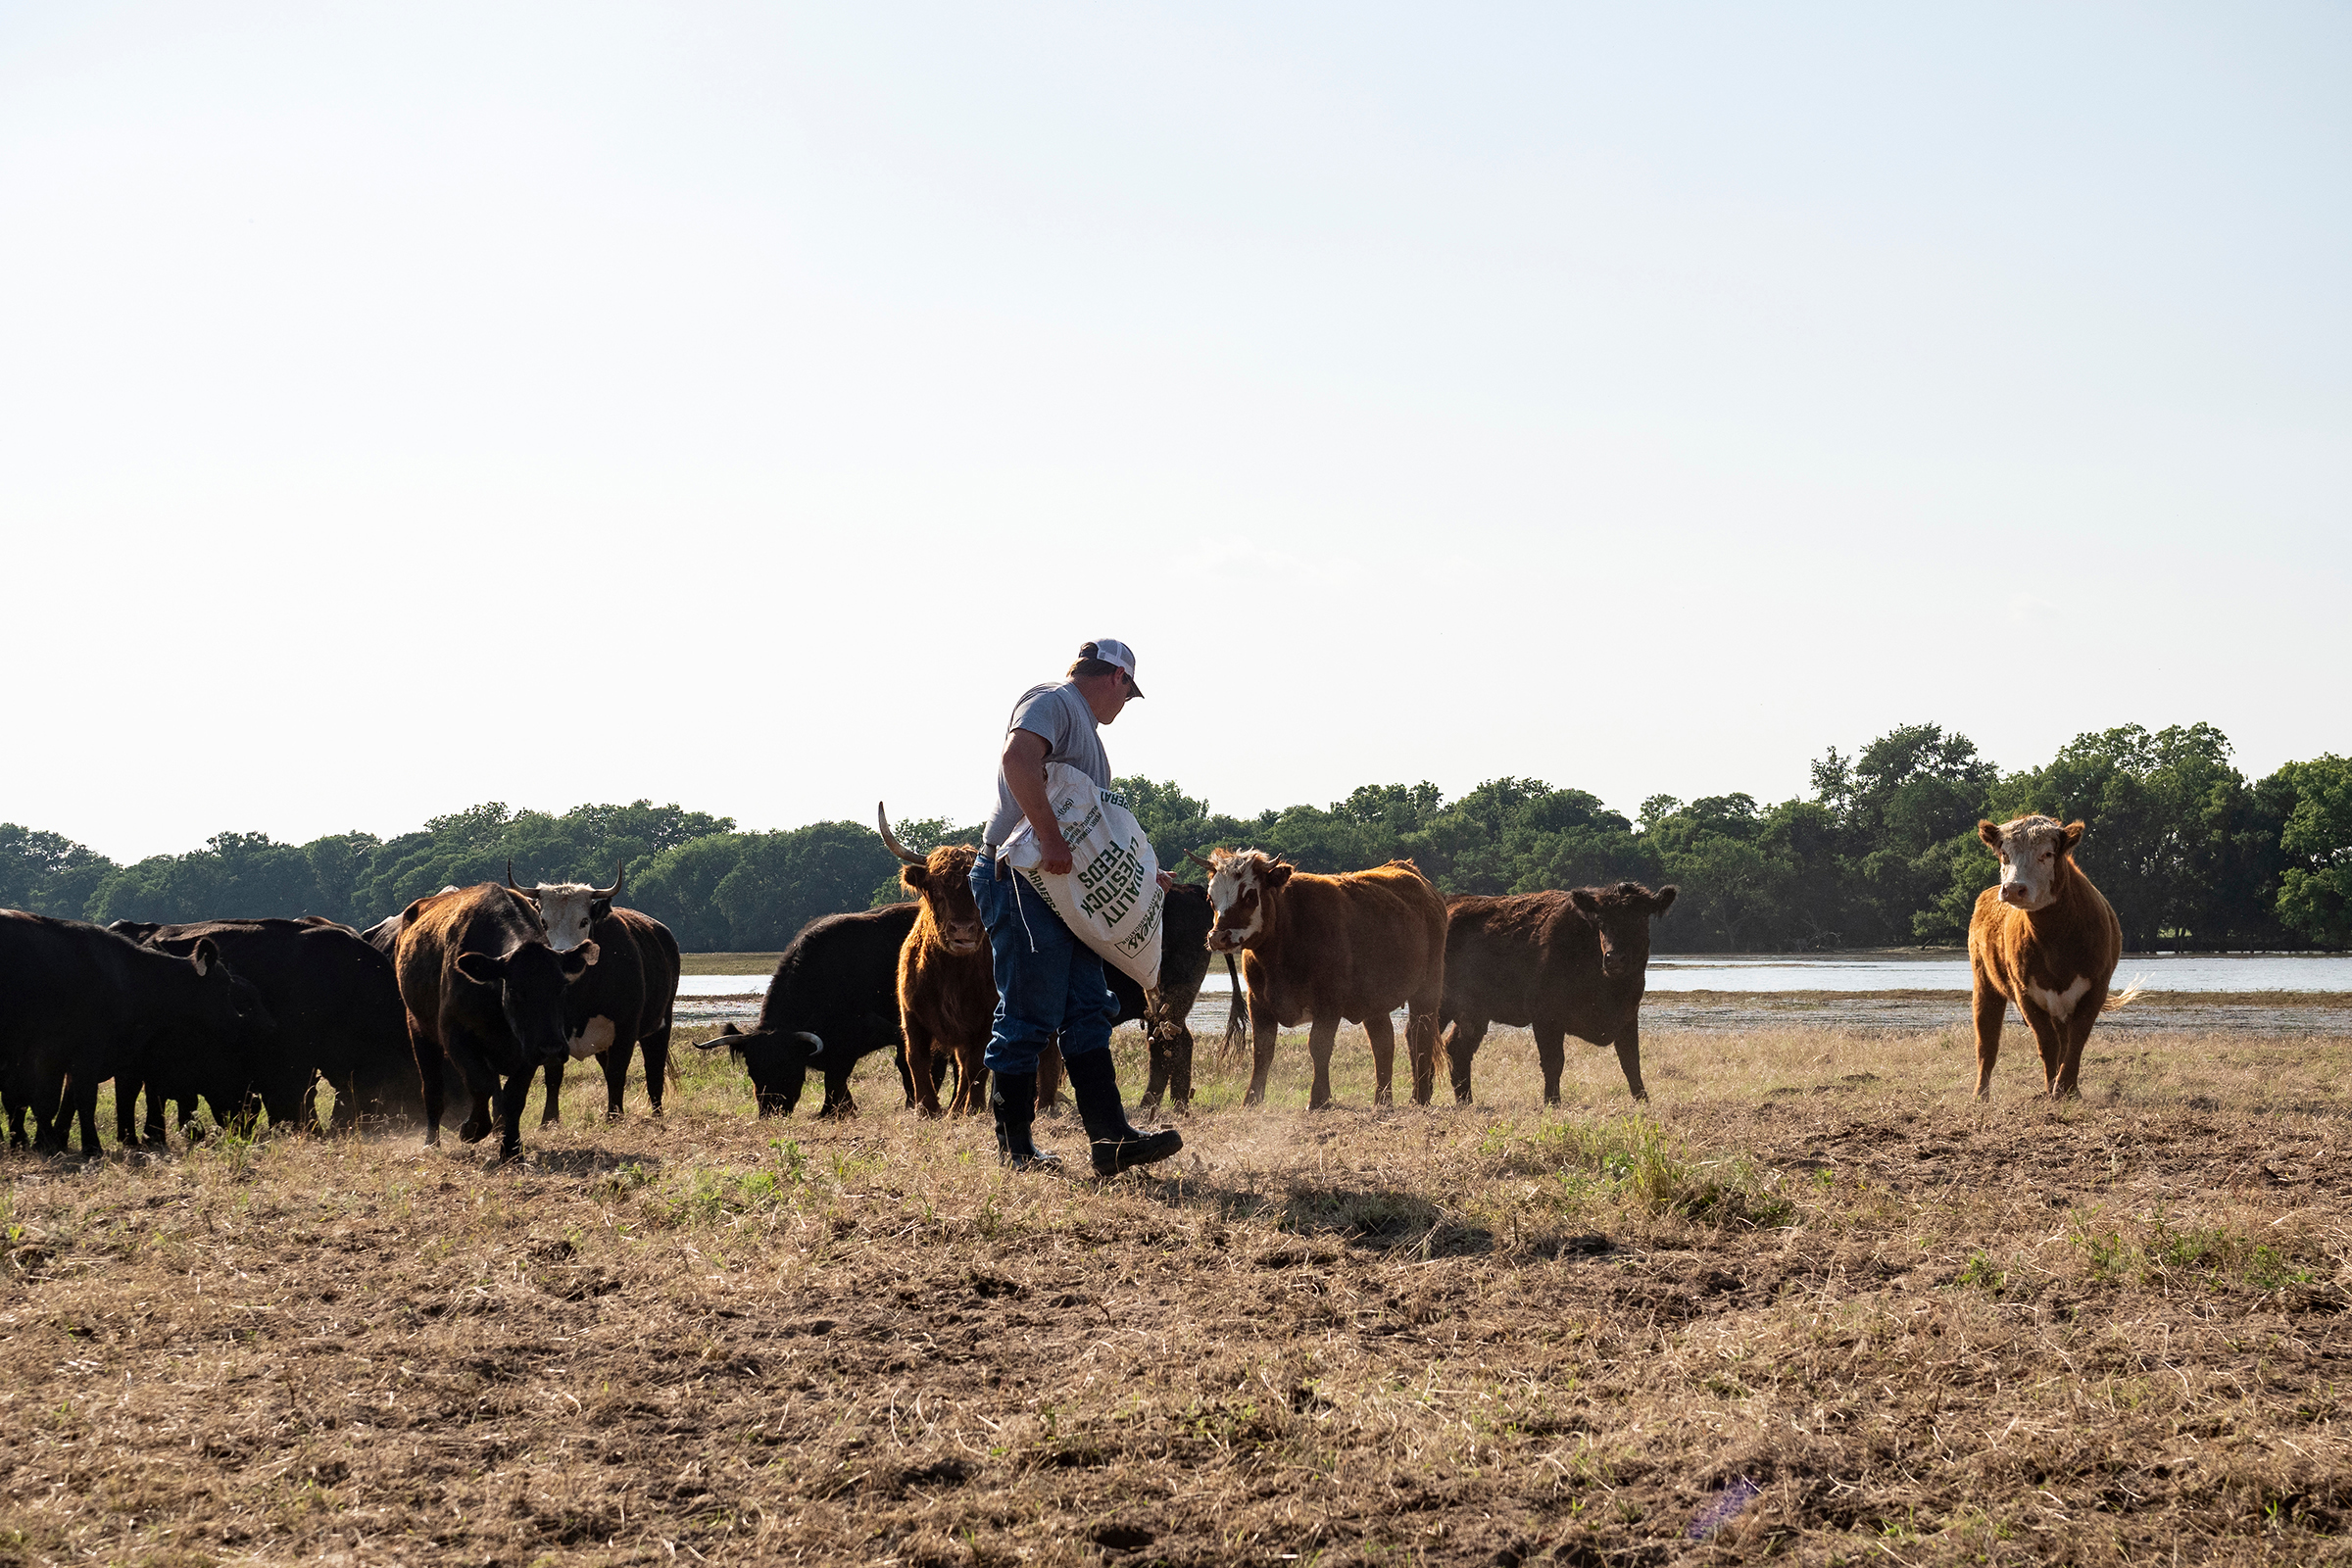 Cattle producers should adjust their feed supplementation programs to ensure a cow grazing native rangeland receives an average of 3.3 pounds of protein per day. (Photo by Todd Johnson, OSU Agriculture.)